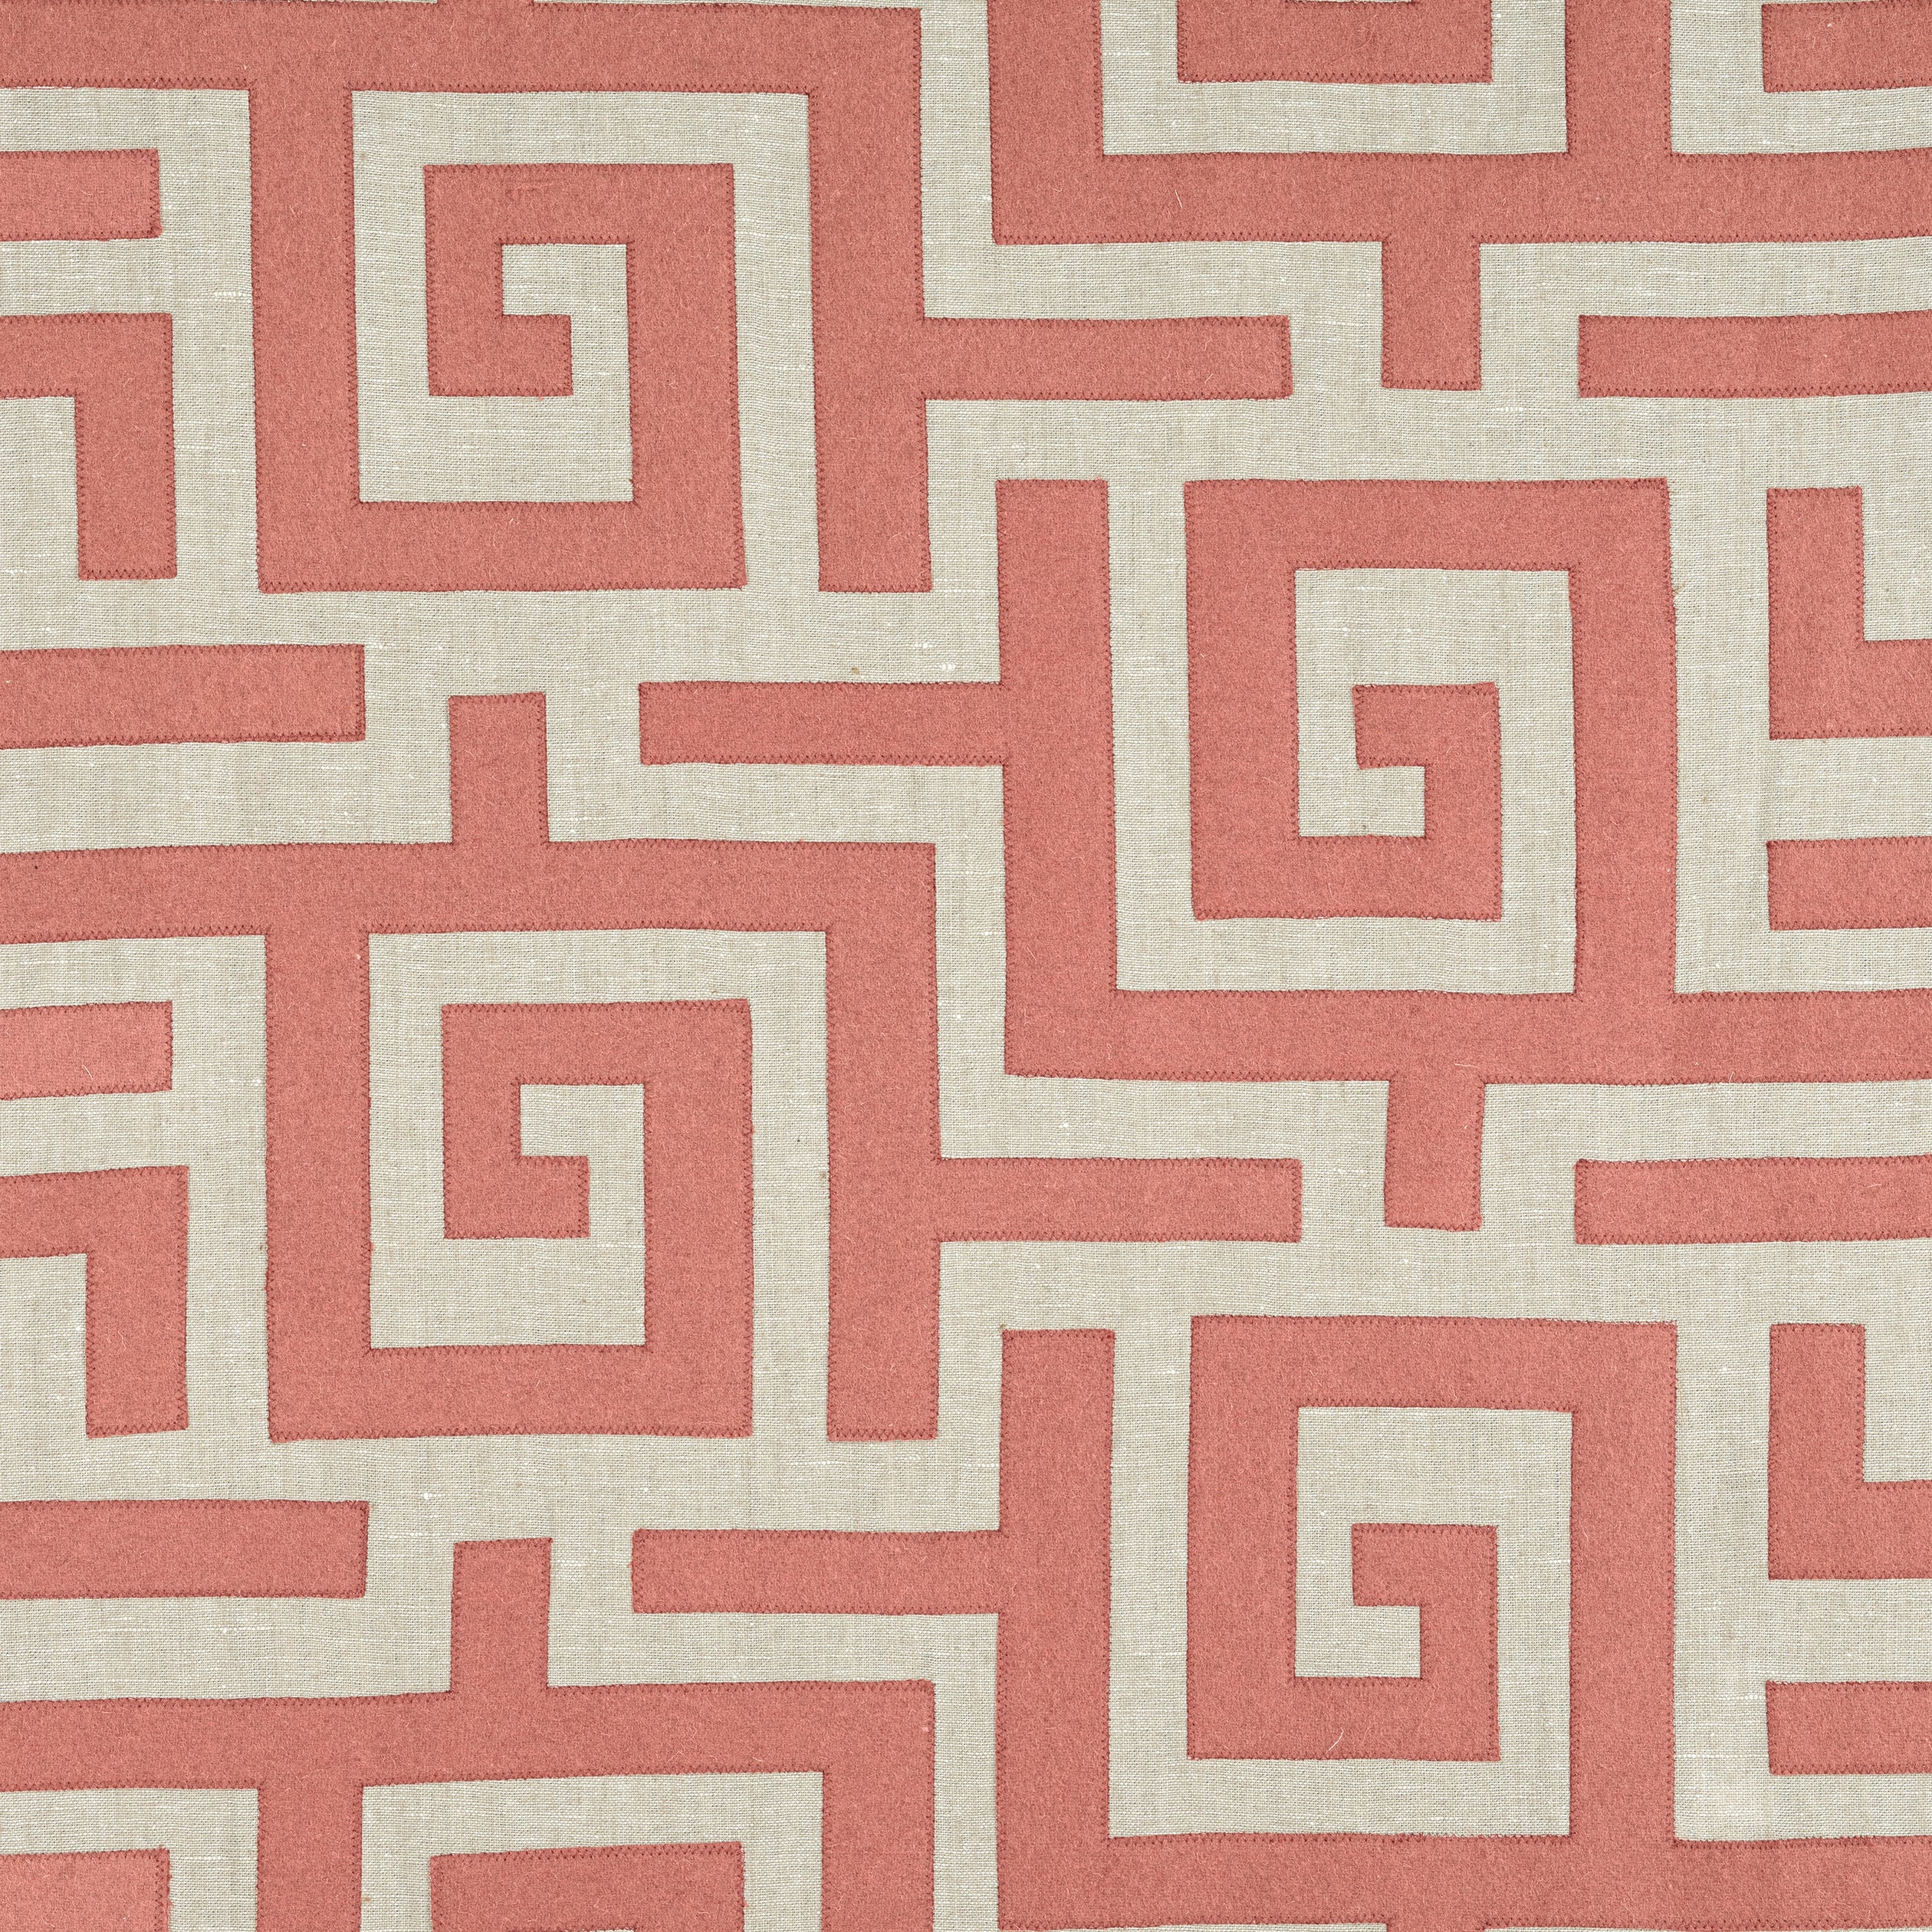 Tulum Applique fabric in coral on natural color - pattern number W713223 - by Thibaut in the Mesa collection